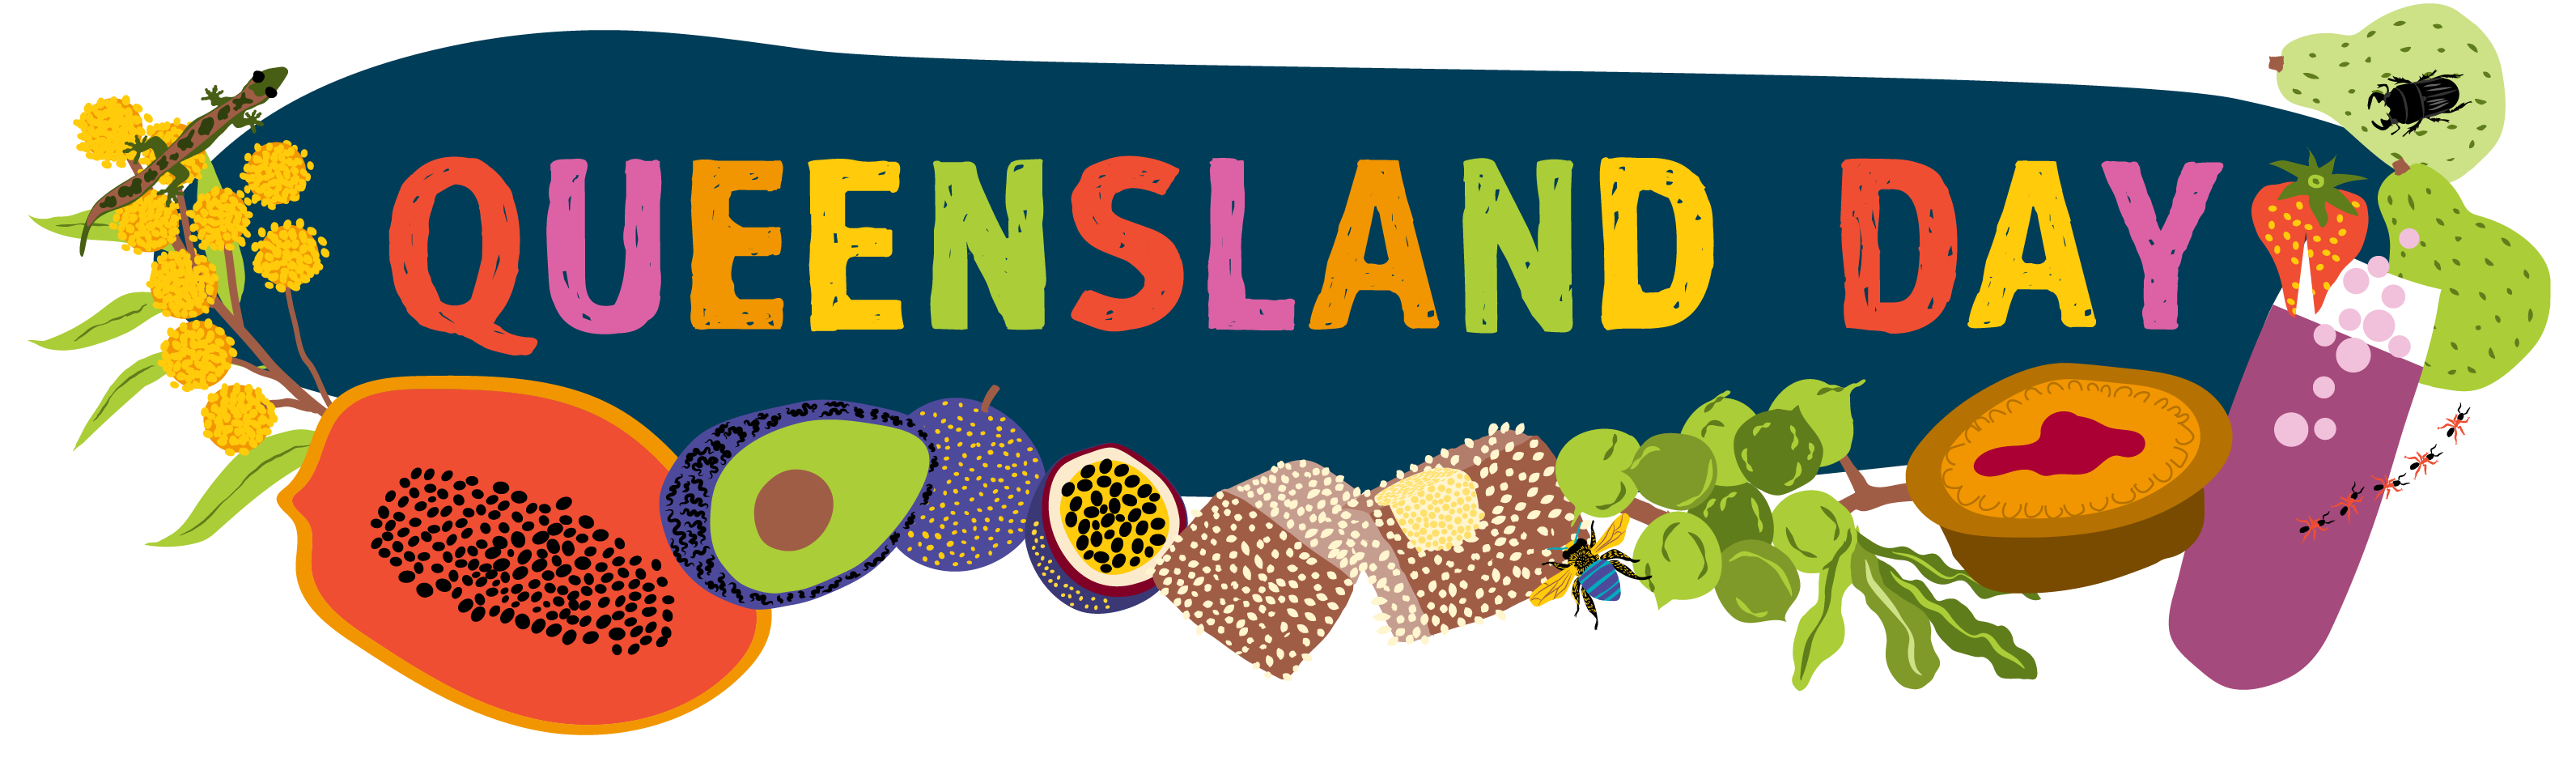 Queensland Day logo featuring QLD iconography